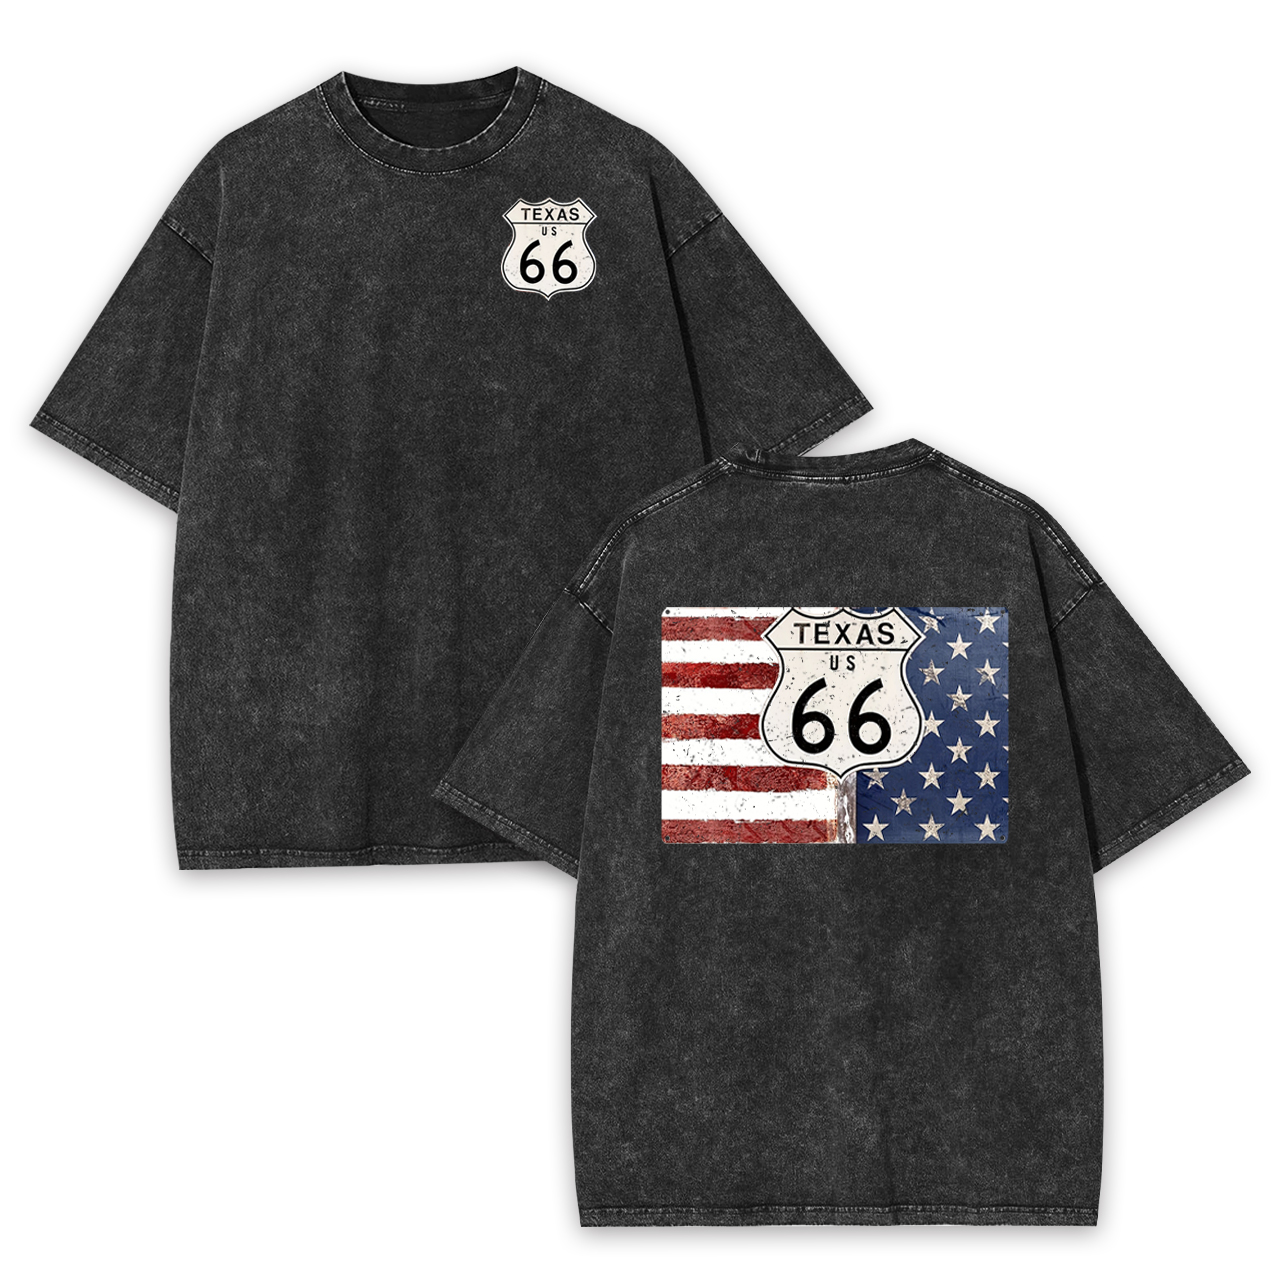 Route 66 Texas With American Flag Garment-dye Tees